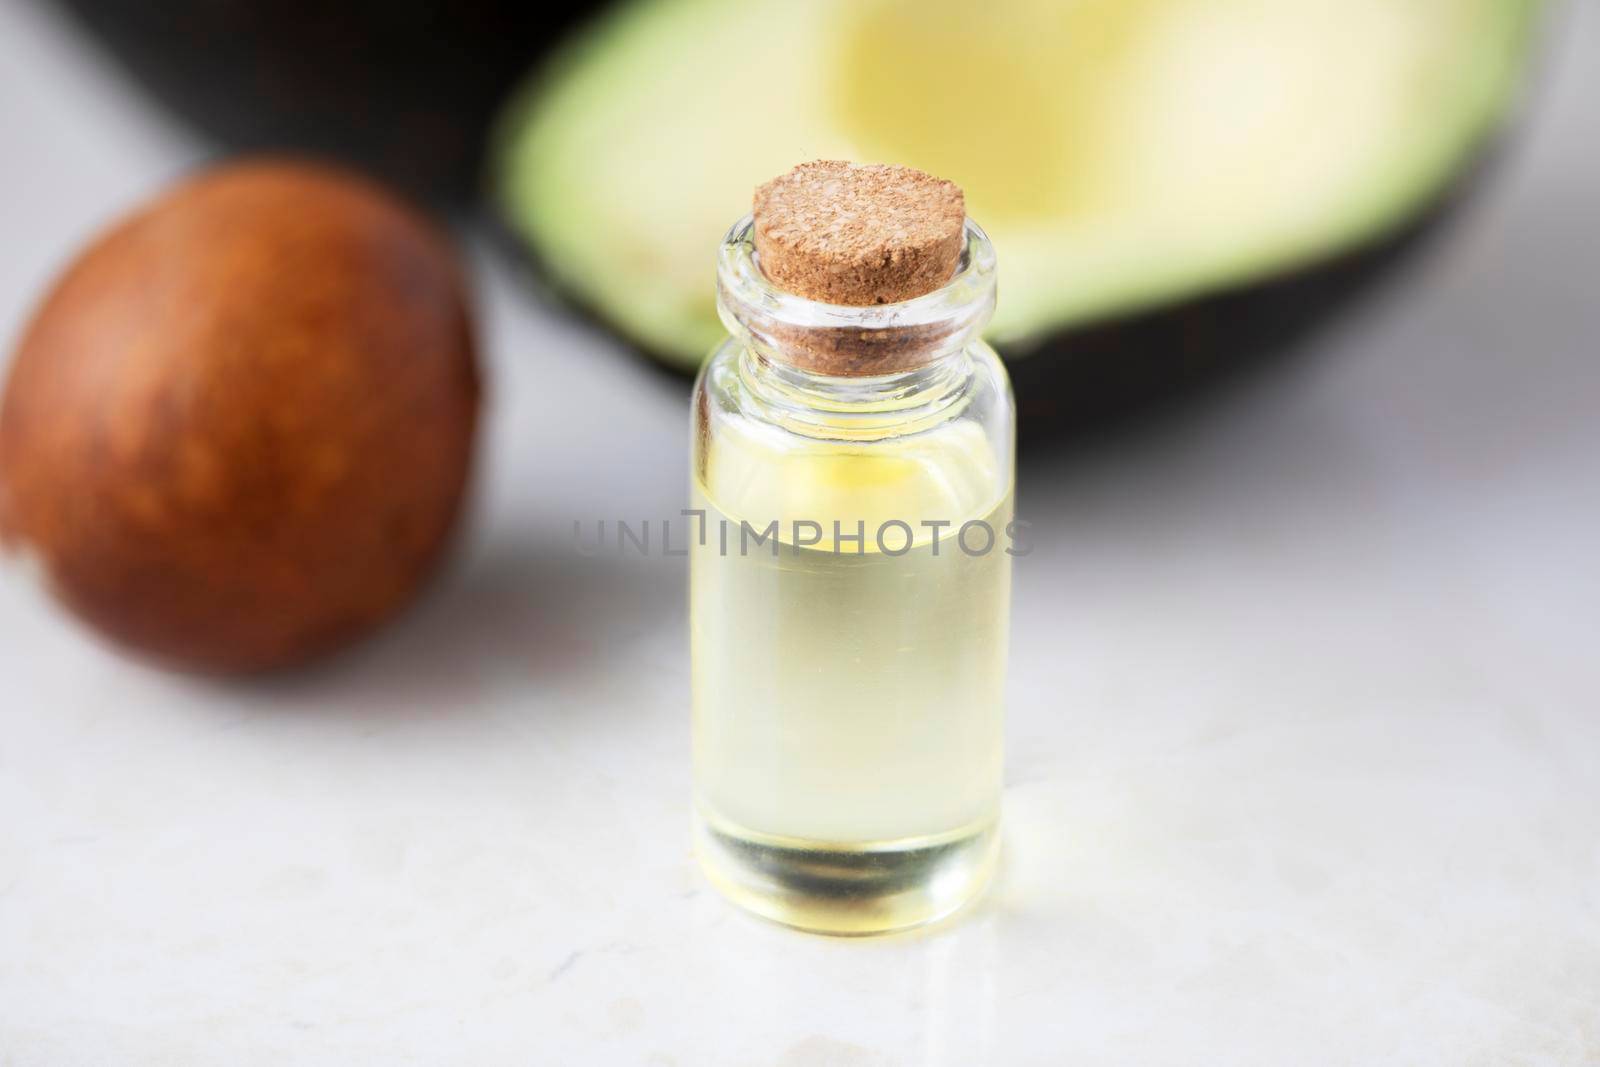 Small bottle of avocado oil and avocados on marble surface